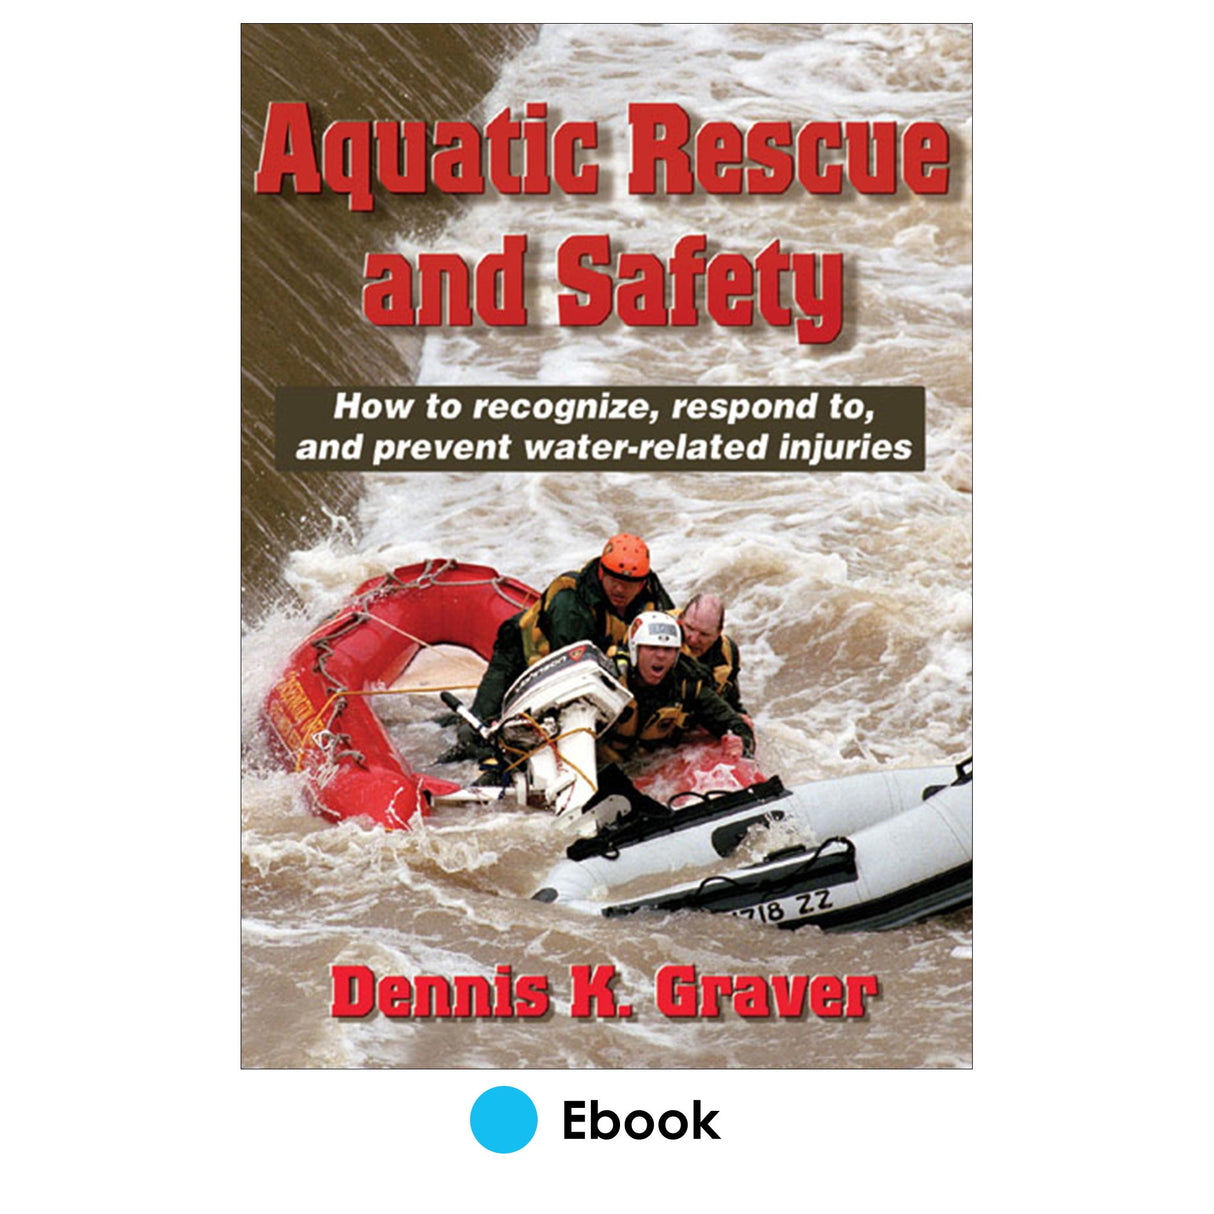 Aquatic Rescue and Safety PDF